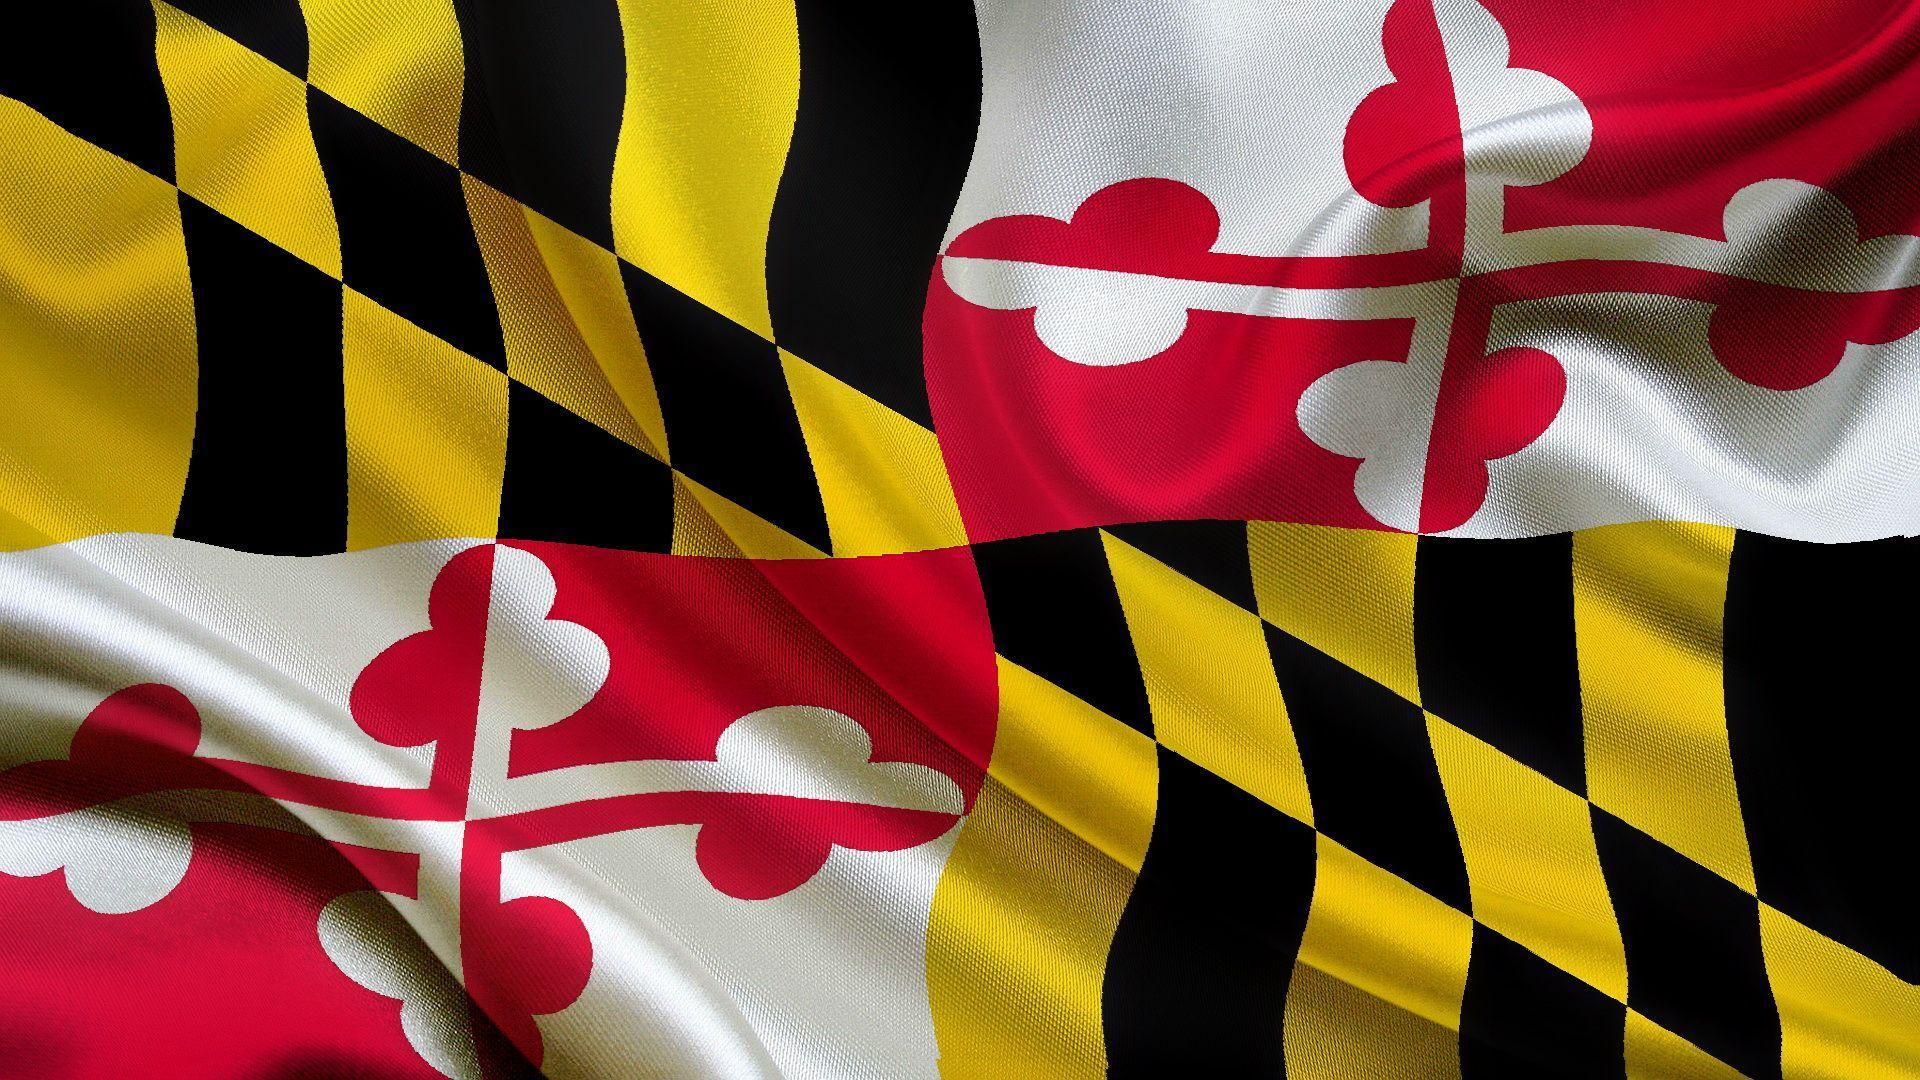 Maryland flag. The oustanding image is part of USA Maryland Flag